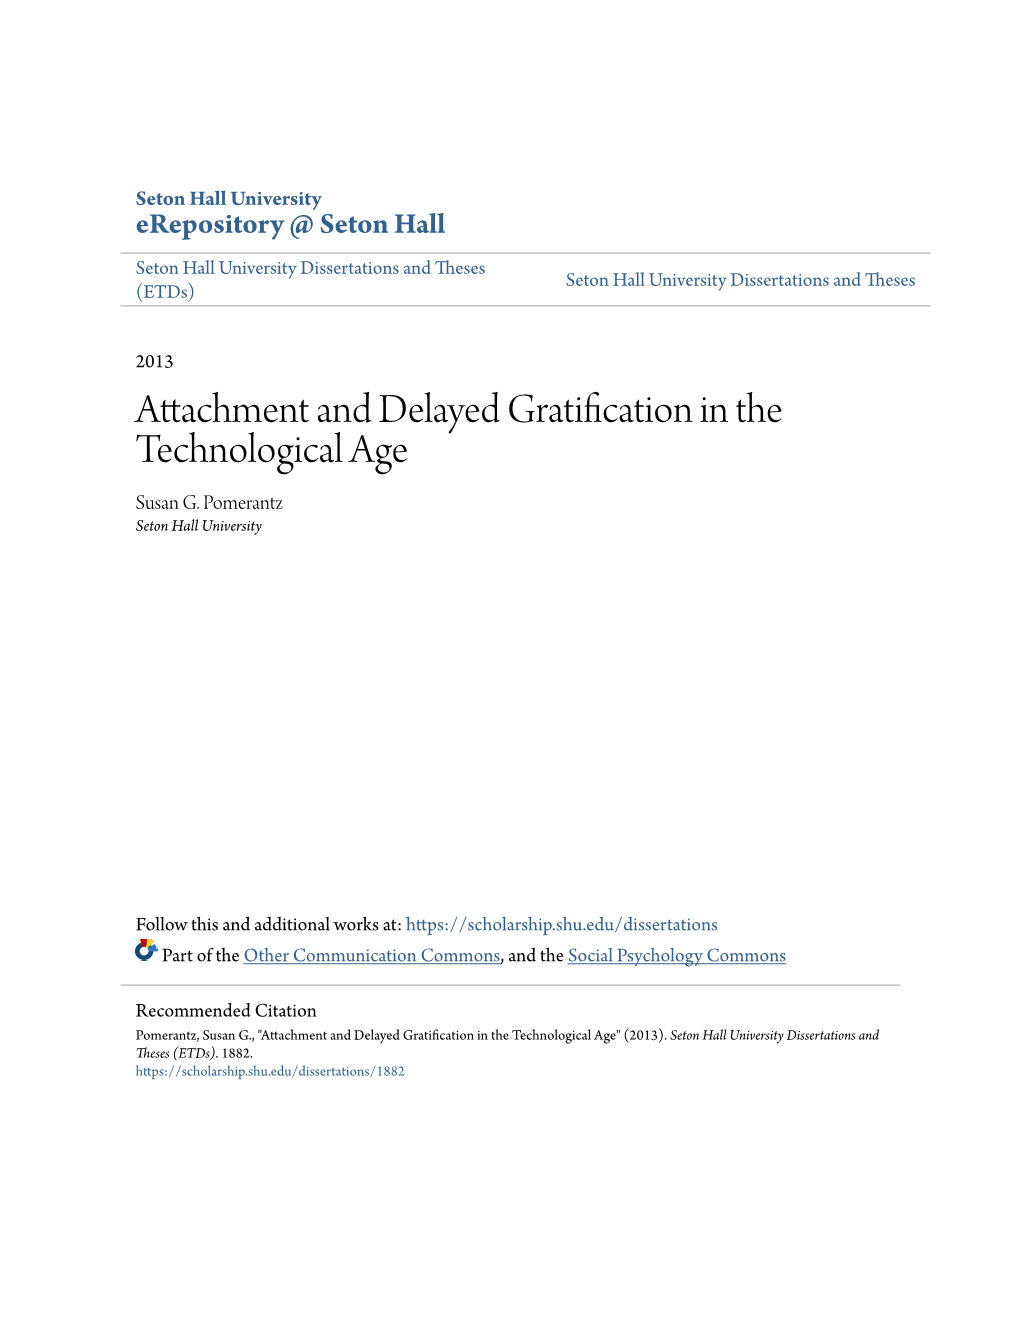 Attachment and Delayed Gratification in the Technological Age Susan G